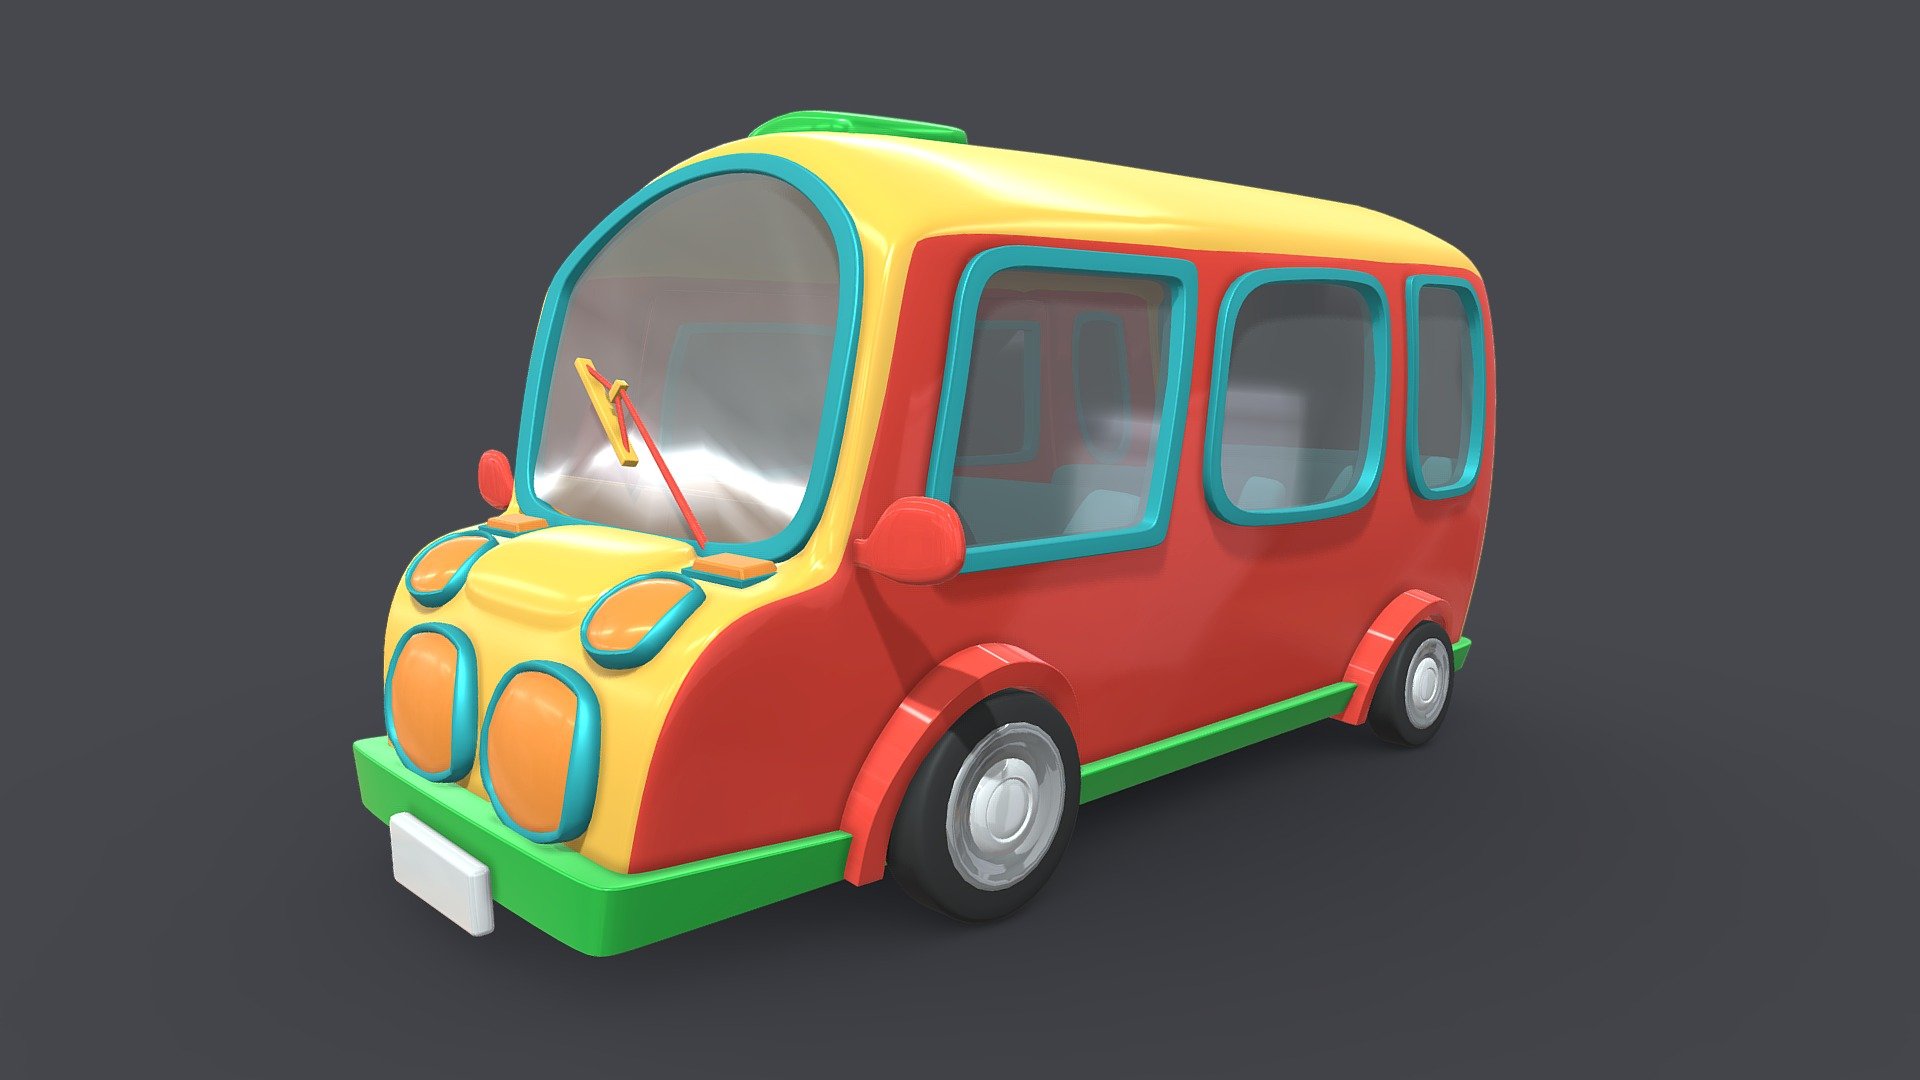 3D Models Bus

Polys : 40399 Verts: 42234

Model we designed to be suitable for cartoons.

Hope you like this

Thanks for watching - Asset - Cartoons - Bus - 3D Model - Buy Royalty Free 3D model by InCom Studio (@incomstudio) 3d model